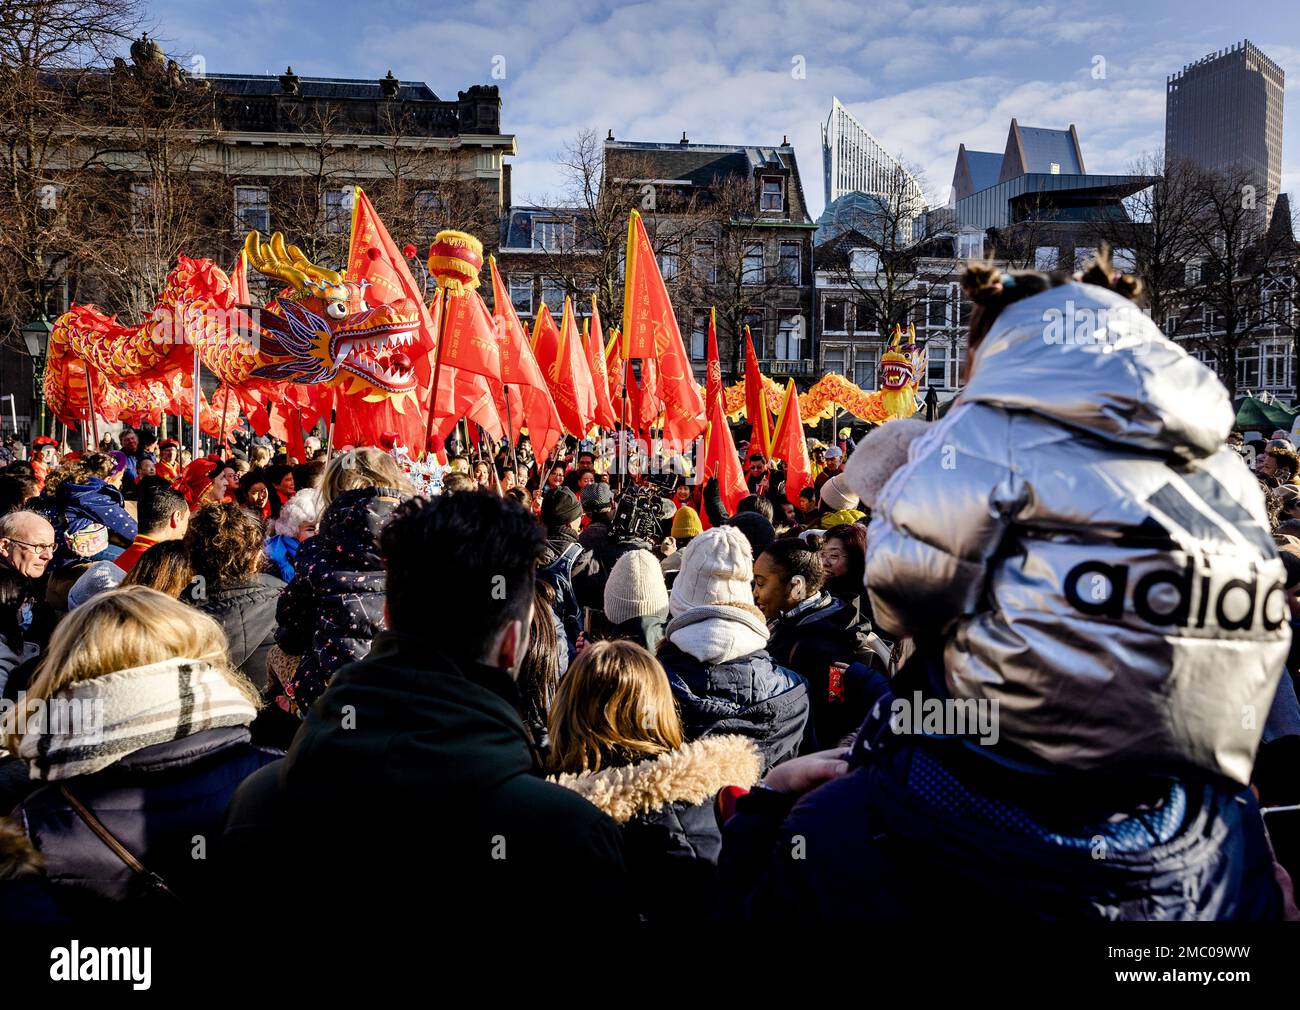 THE HAGUE - A parade during the national celebration of the Chinese New Year. According to the Chinese zodiac, the year 2023 is all about the Rabbit. ANP SEM VAN DER WAL netherlands out - belgium out Credit: ANP/Alamy Live News Stock Photo